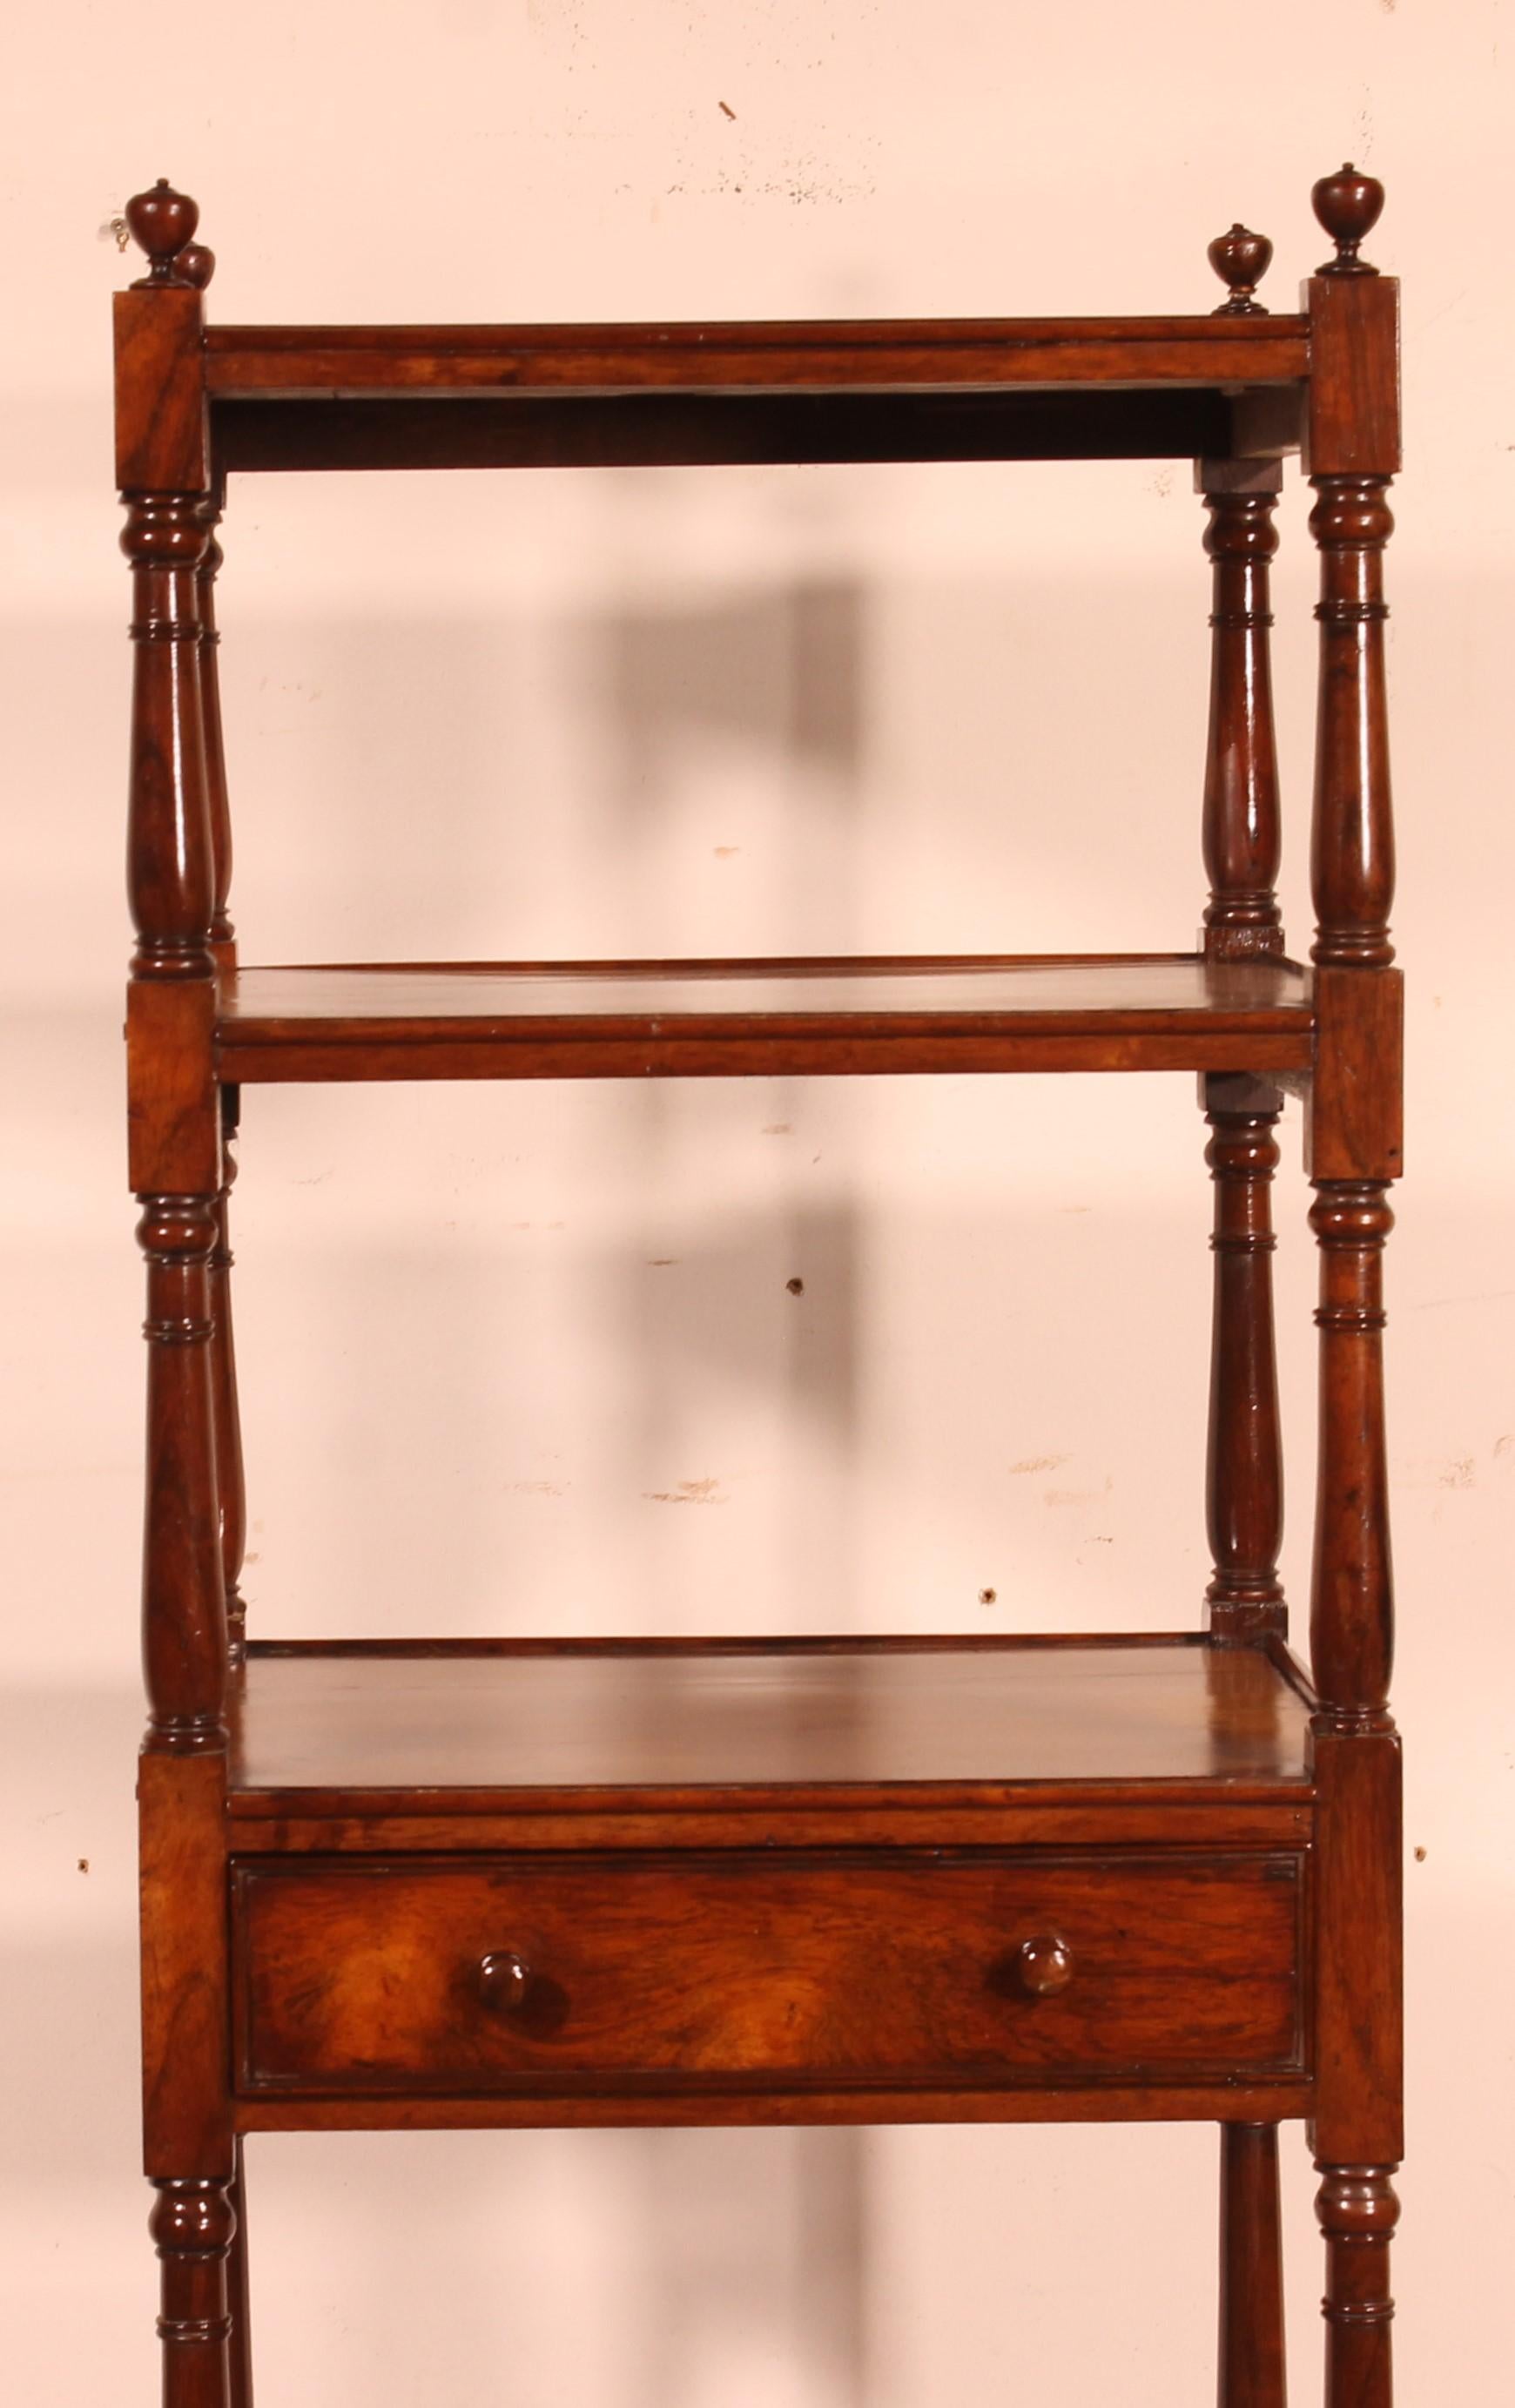 Victorian Rosewood Whatnot Or Shelf From 19th Century - England